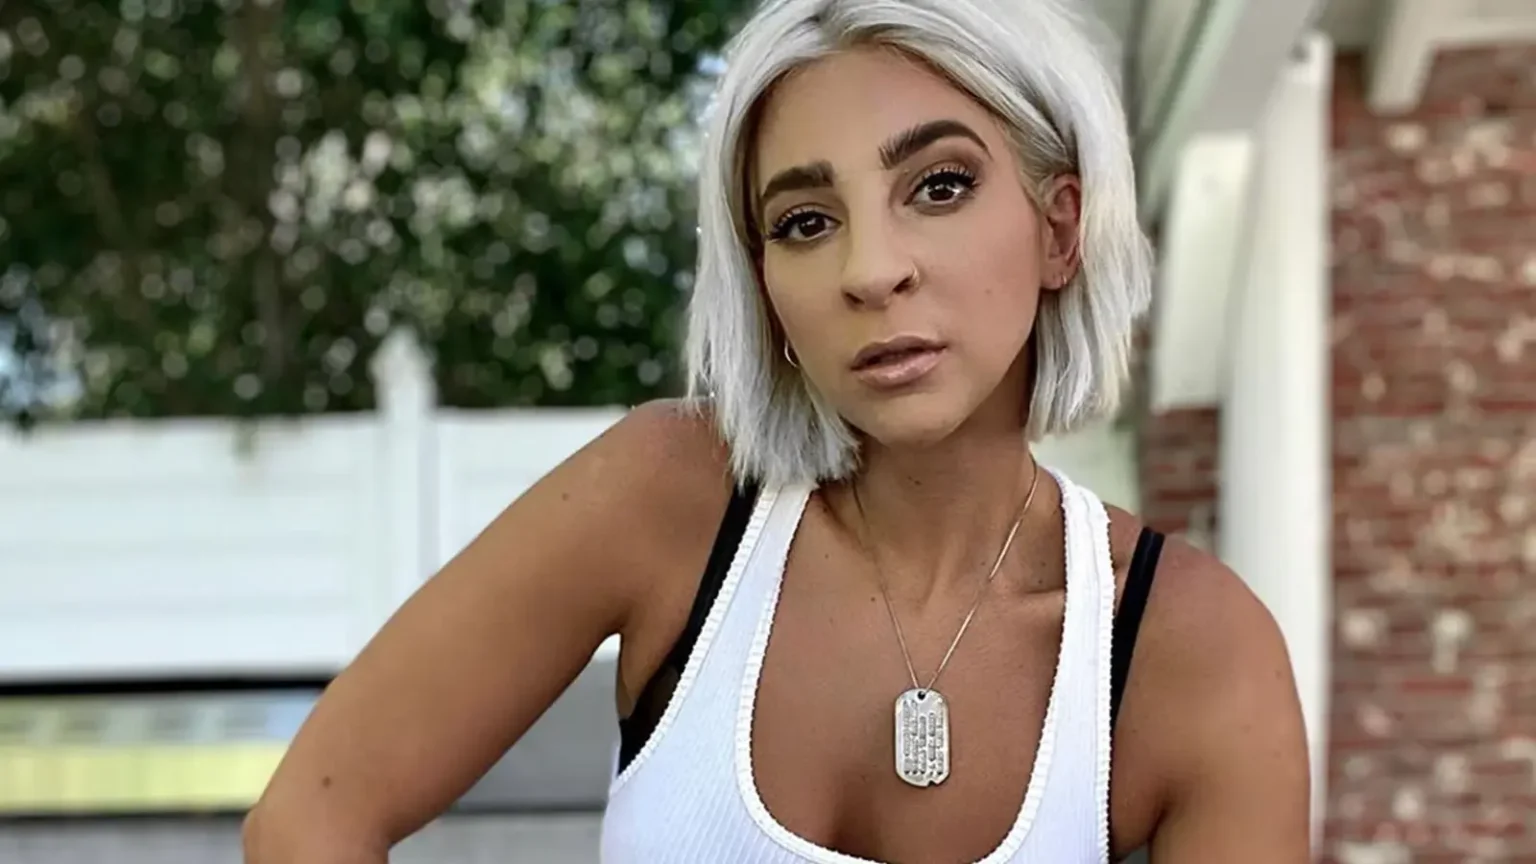 gabbie-hanna-reappears-as-a-ymca-instructor-after-disappearing-from-the-internet